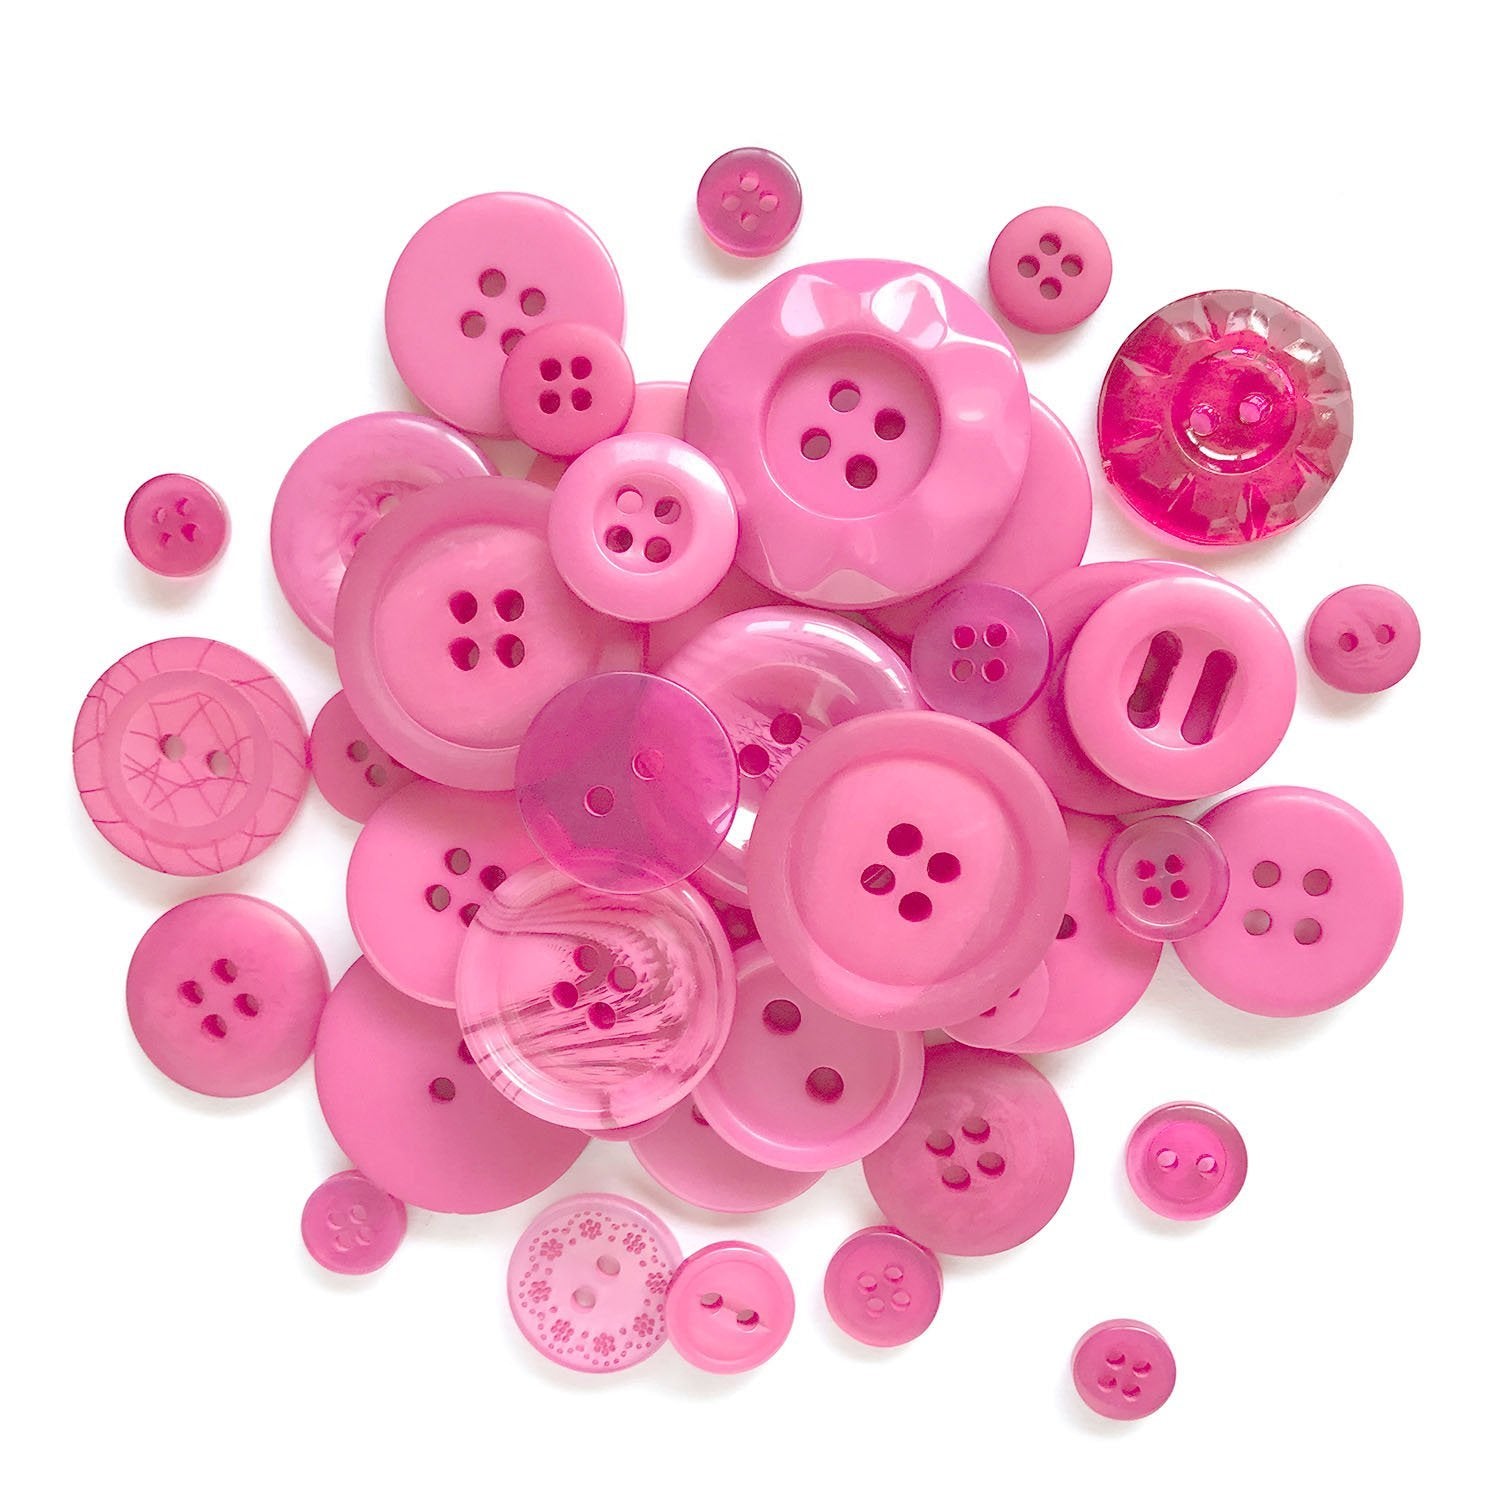 Sprinkletz Embellishments - Pink It Up From Buttons Galore and More -  Embellishments - Beads, Charms, Buttons - Casa Cenina